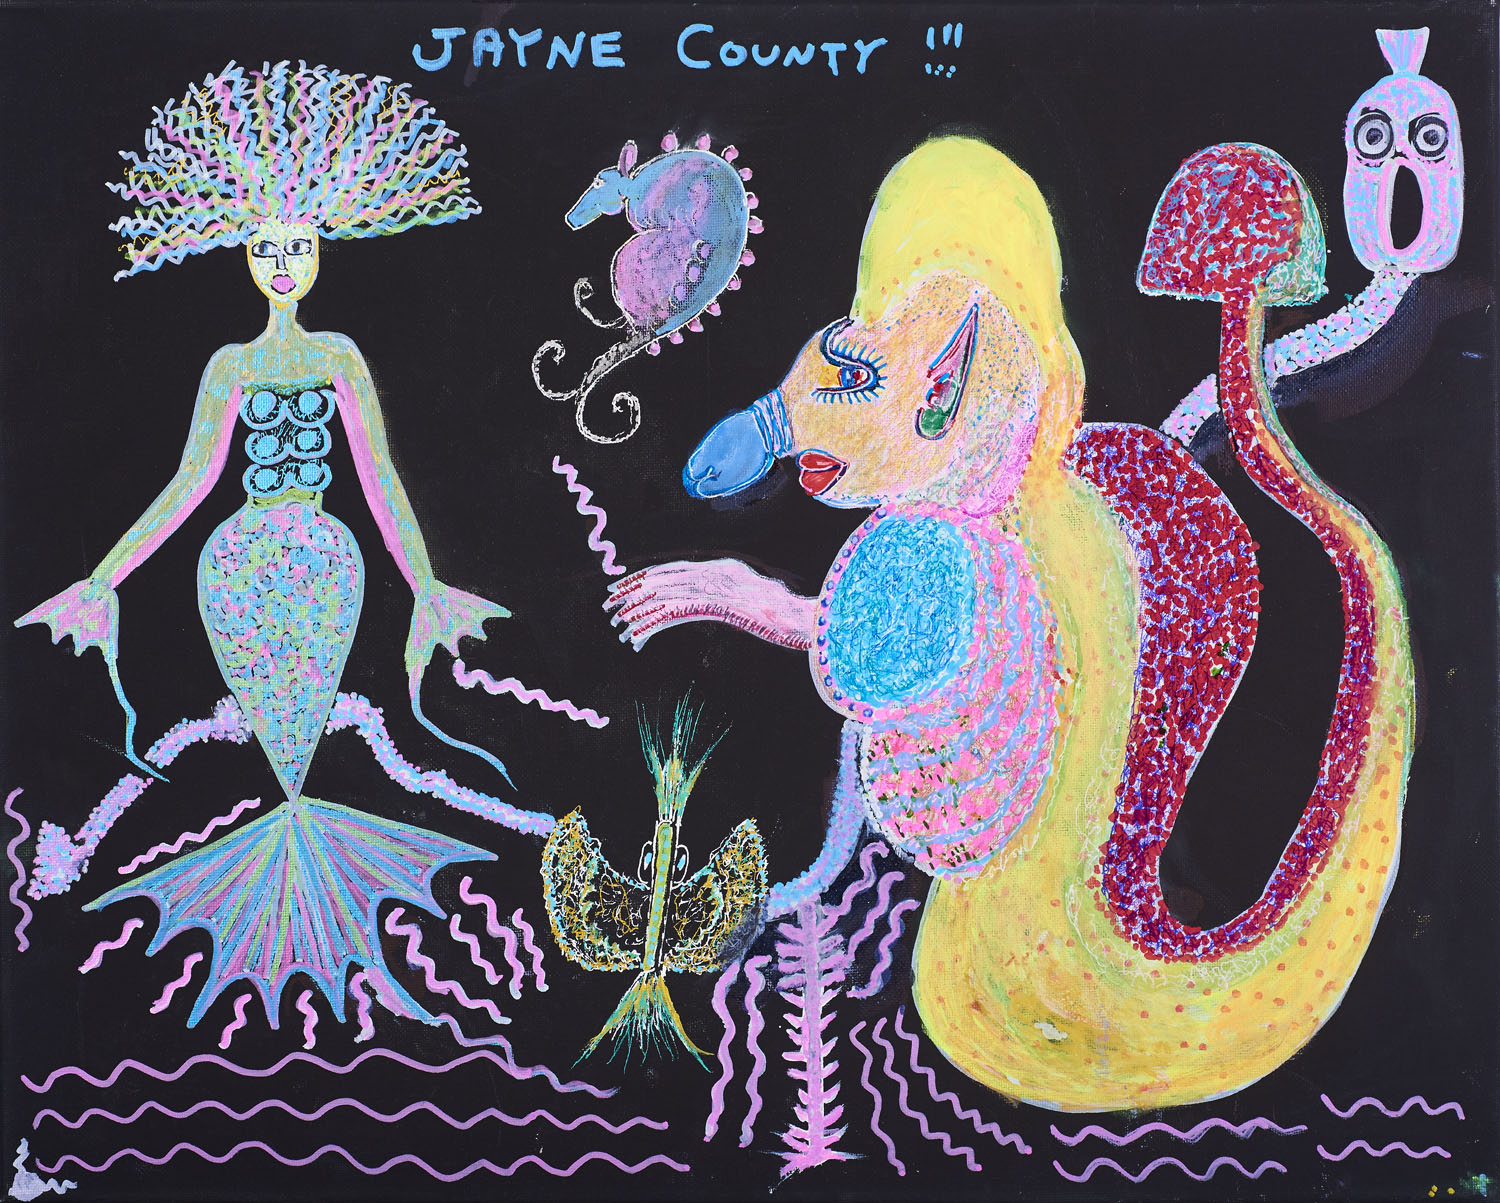 Jayne County, *Doogie and the Mermaid*, 2017. Acrylic and marker on canvas